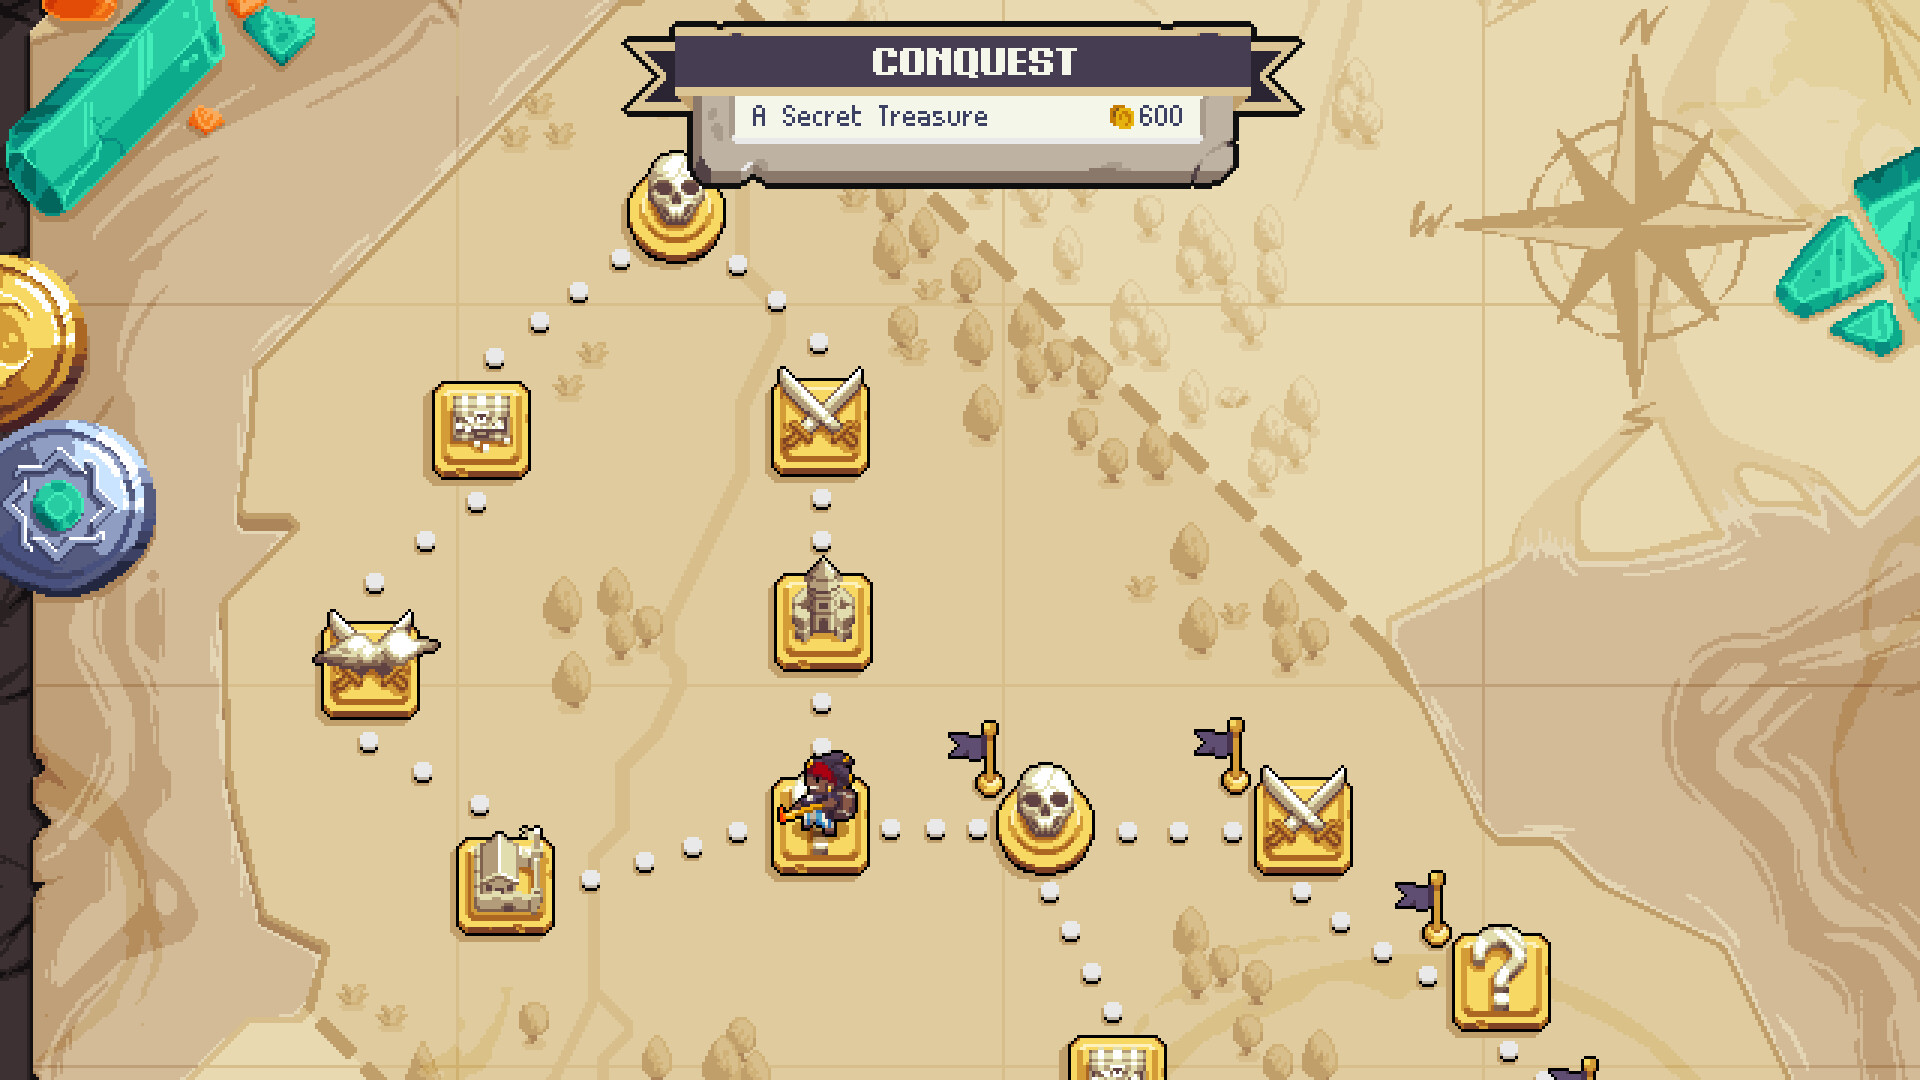 The conquest map in Wargroove 2